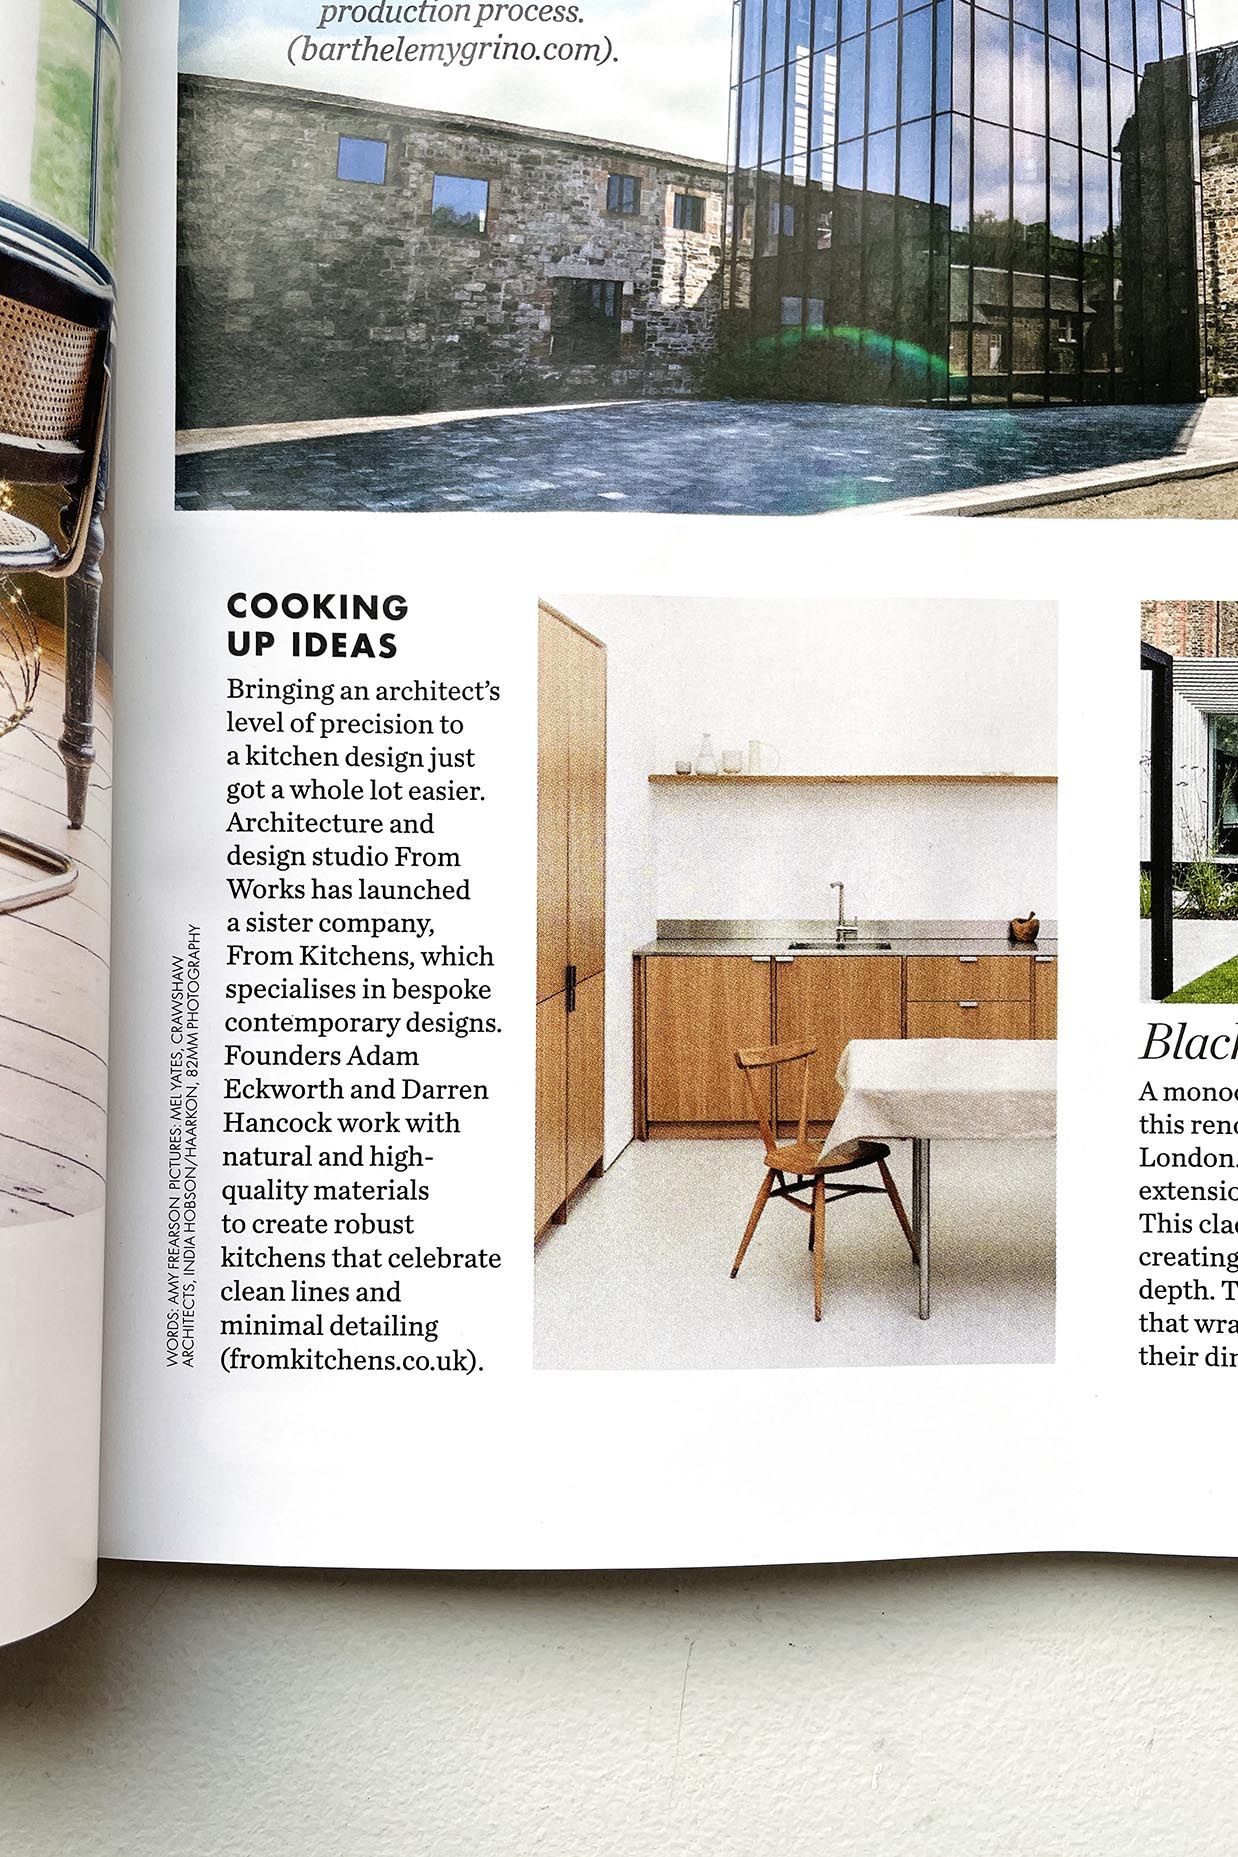 From Kitchens feature within Elle Decoration magazine.